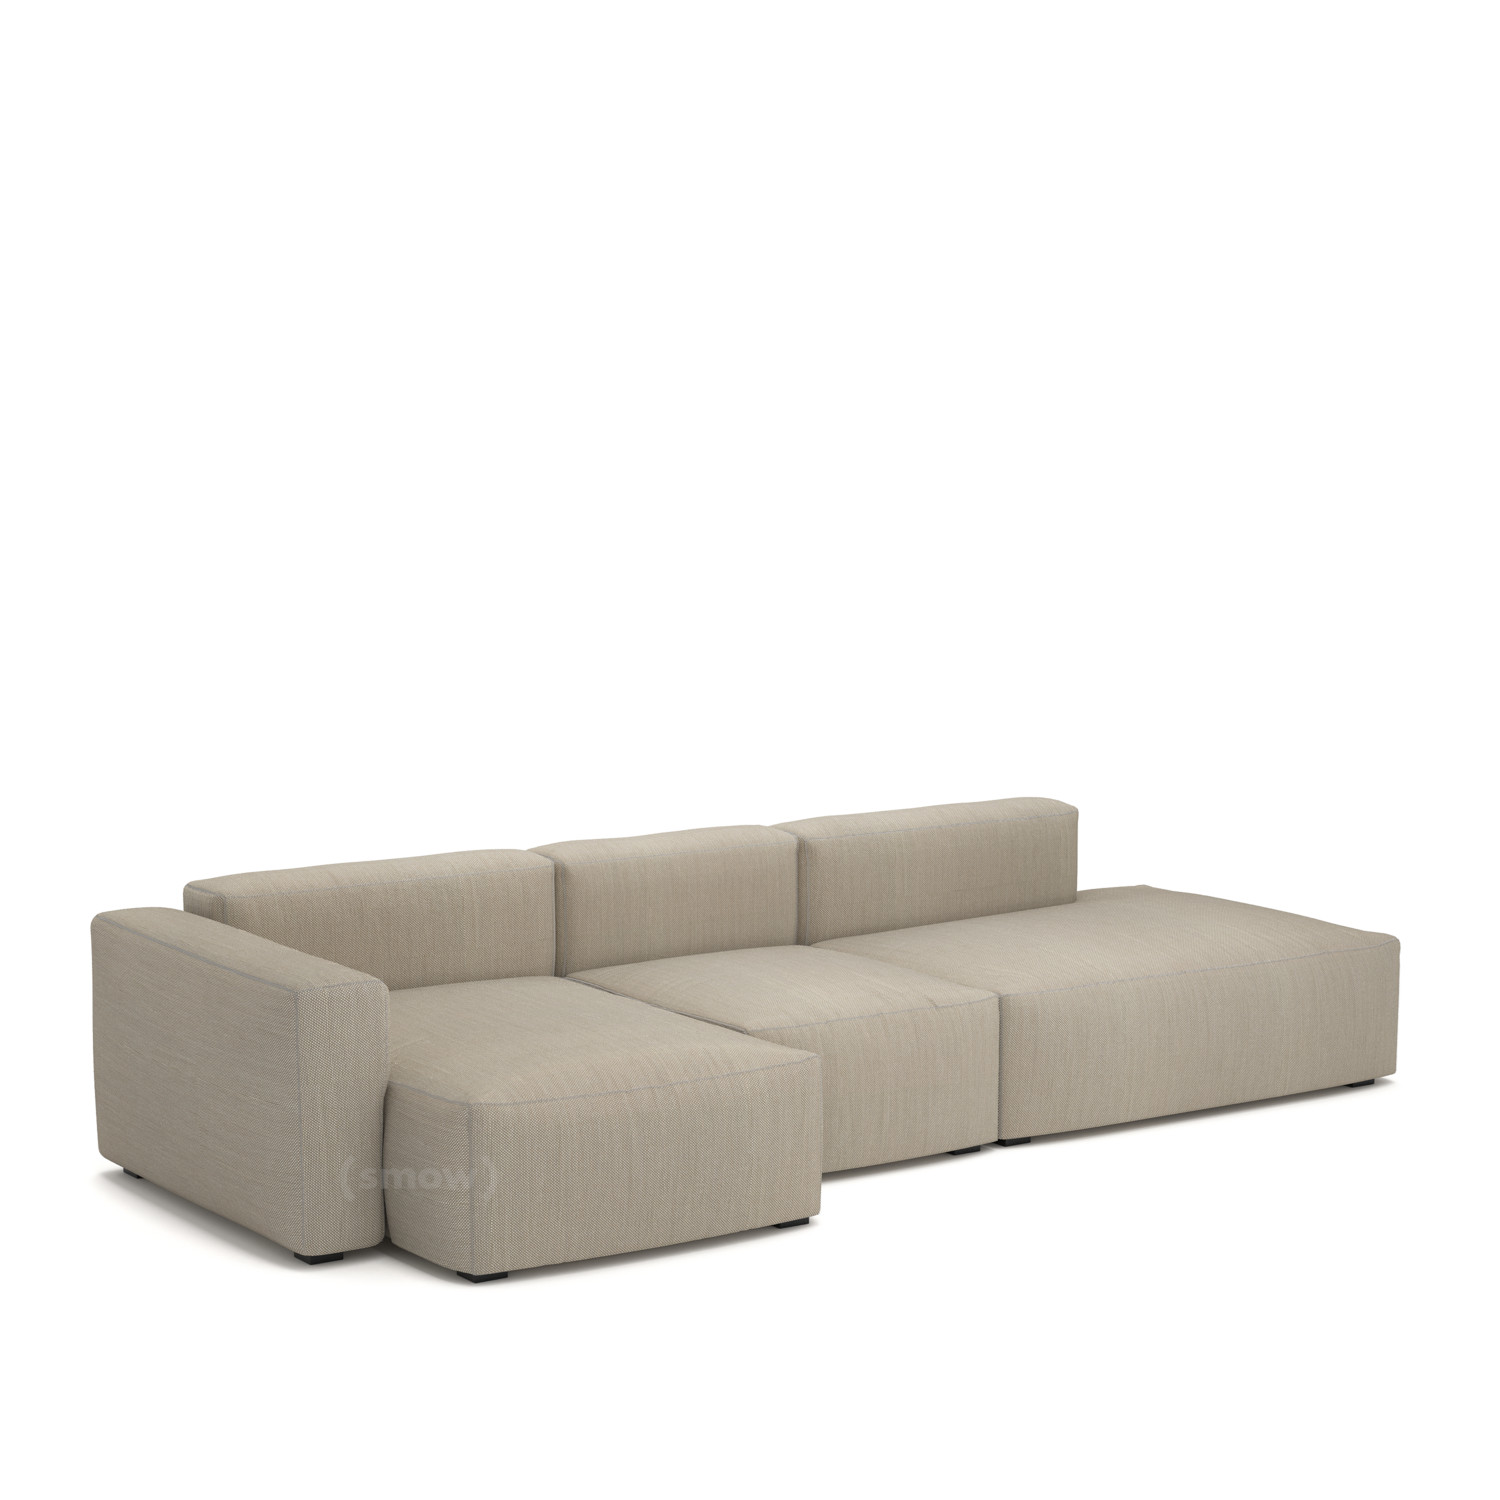 Mentor Kameel Medic Hay Mags Soft Sofa Combination 4, Left armrest, Steelcut Trio - beige by  Hay - Designer furniture by smow.com